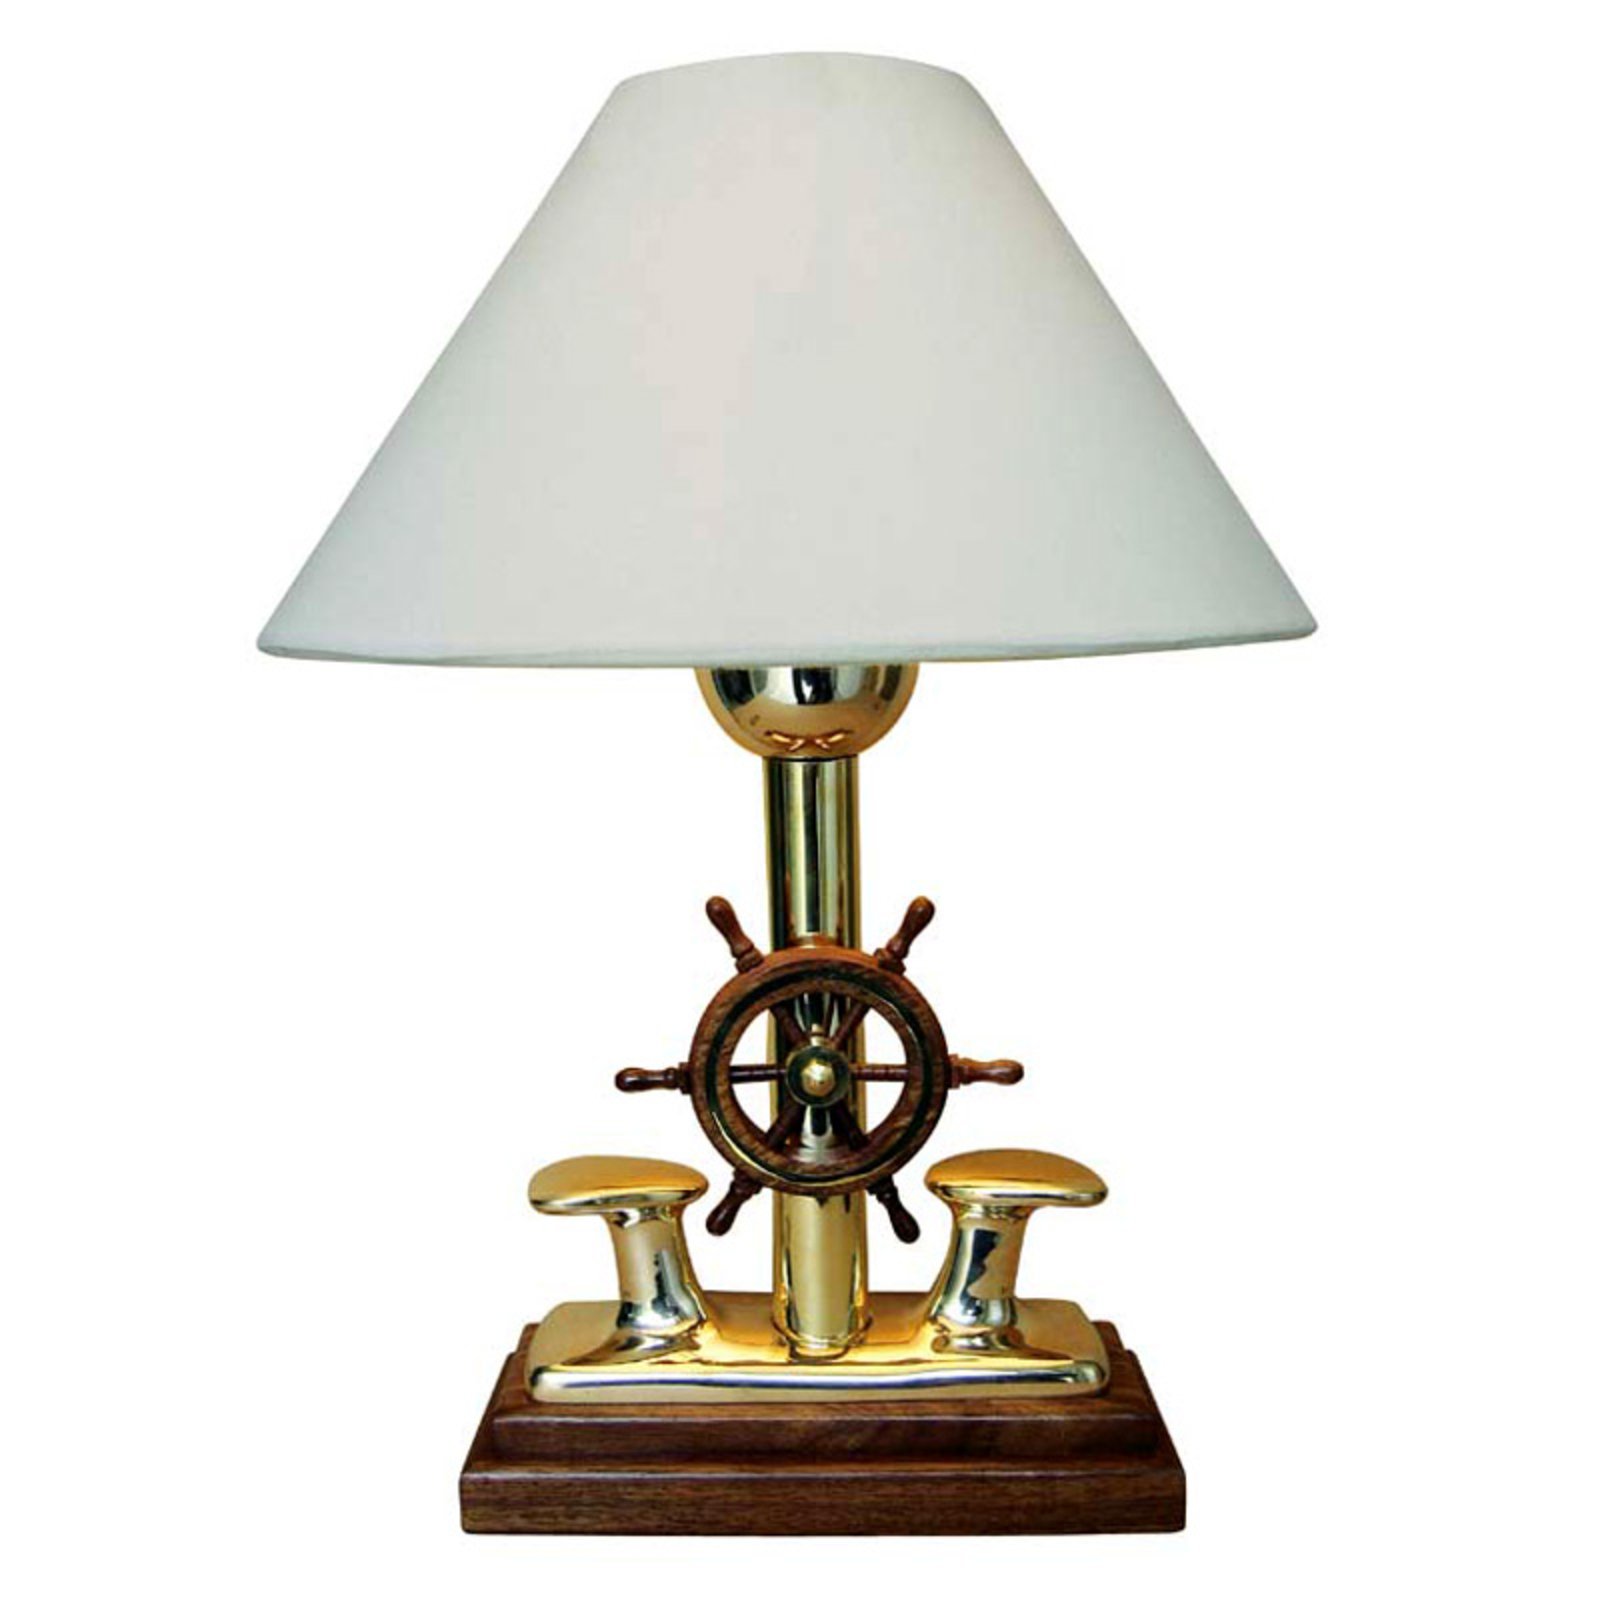 Decorative LUV table lamp with wood